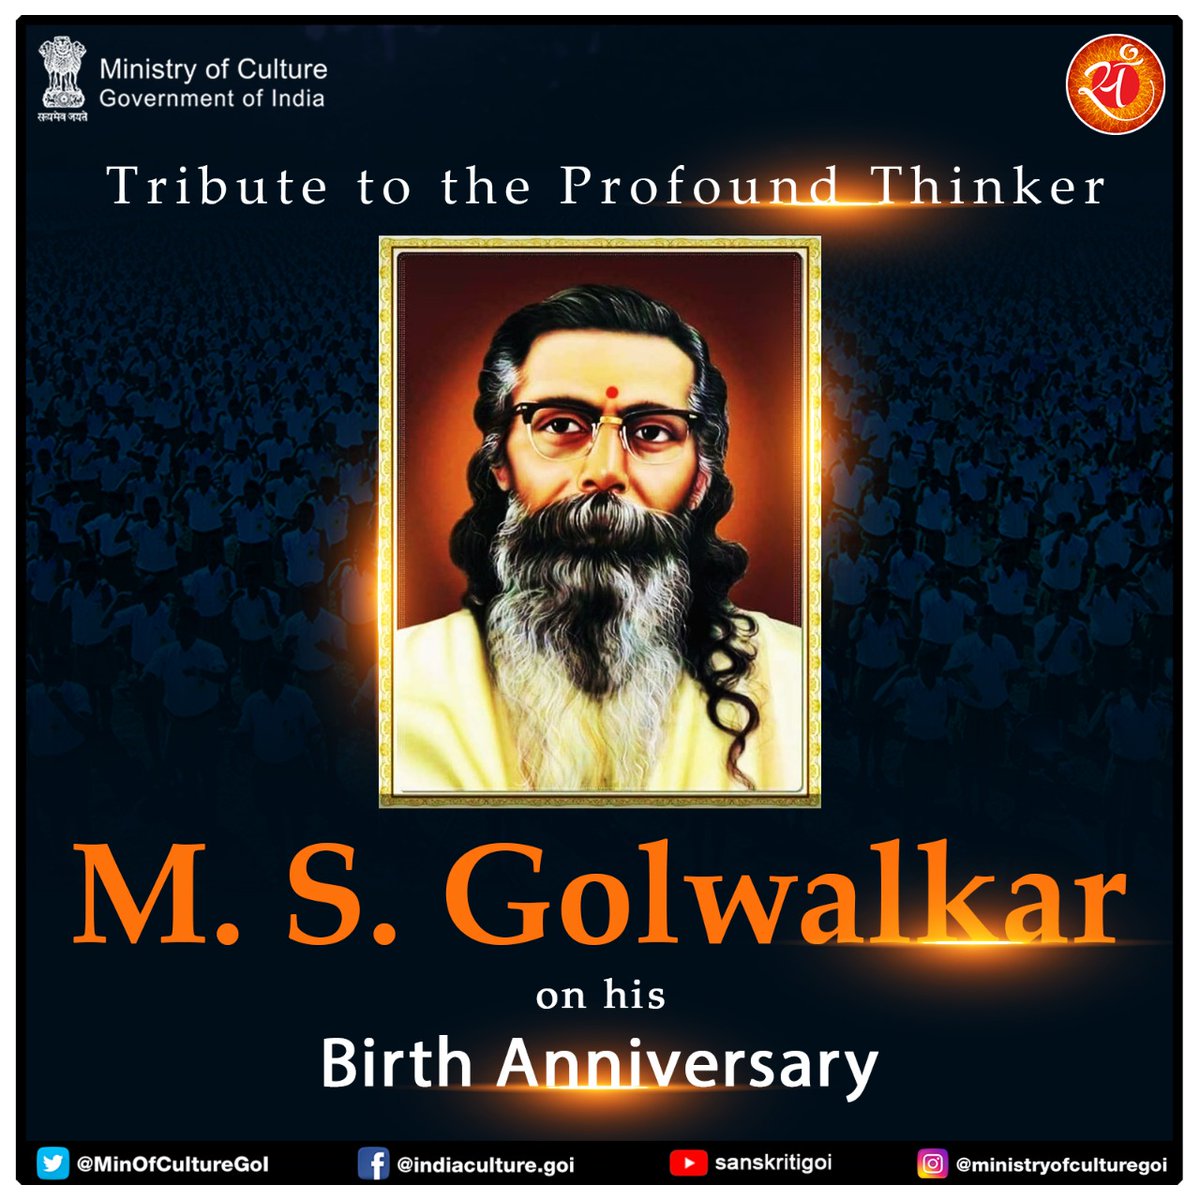 Remembering a great thinker, scholar, and remarkable leader #MSGolwalkar on his birth anniversary. His thoughts will remain a source of inspiration & continue to guide generations. @prahladspatel @secycultureGOI @PMOIndia @PIBCulture @pspoffice